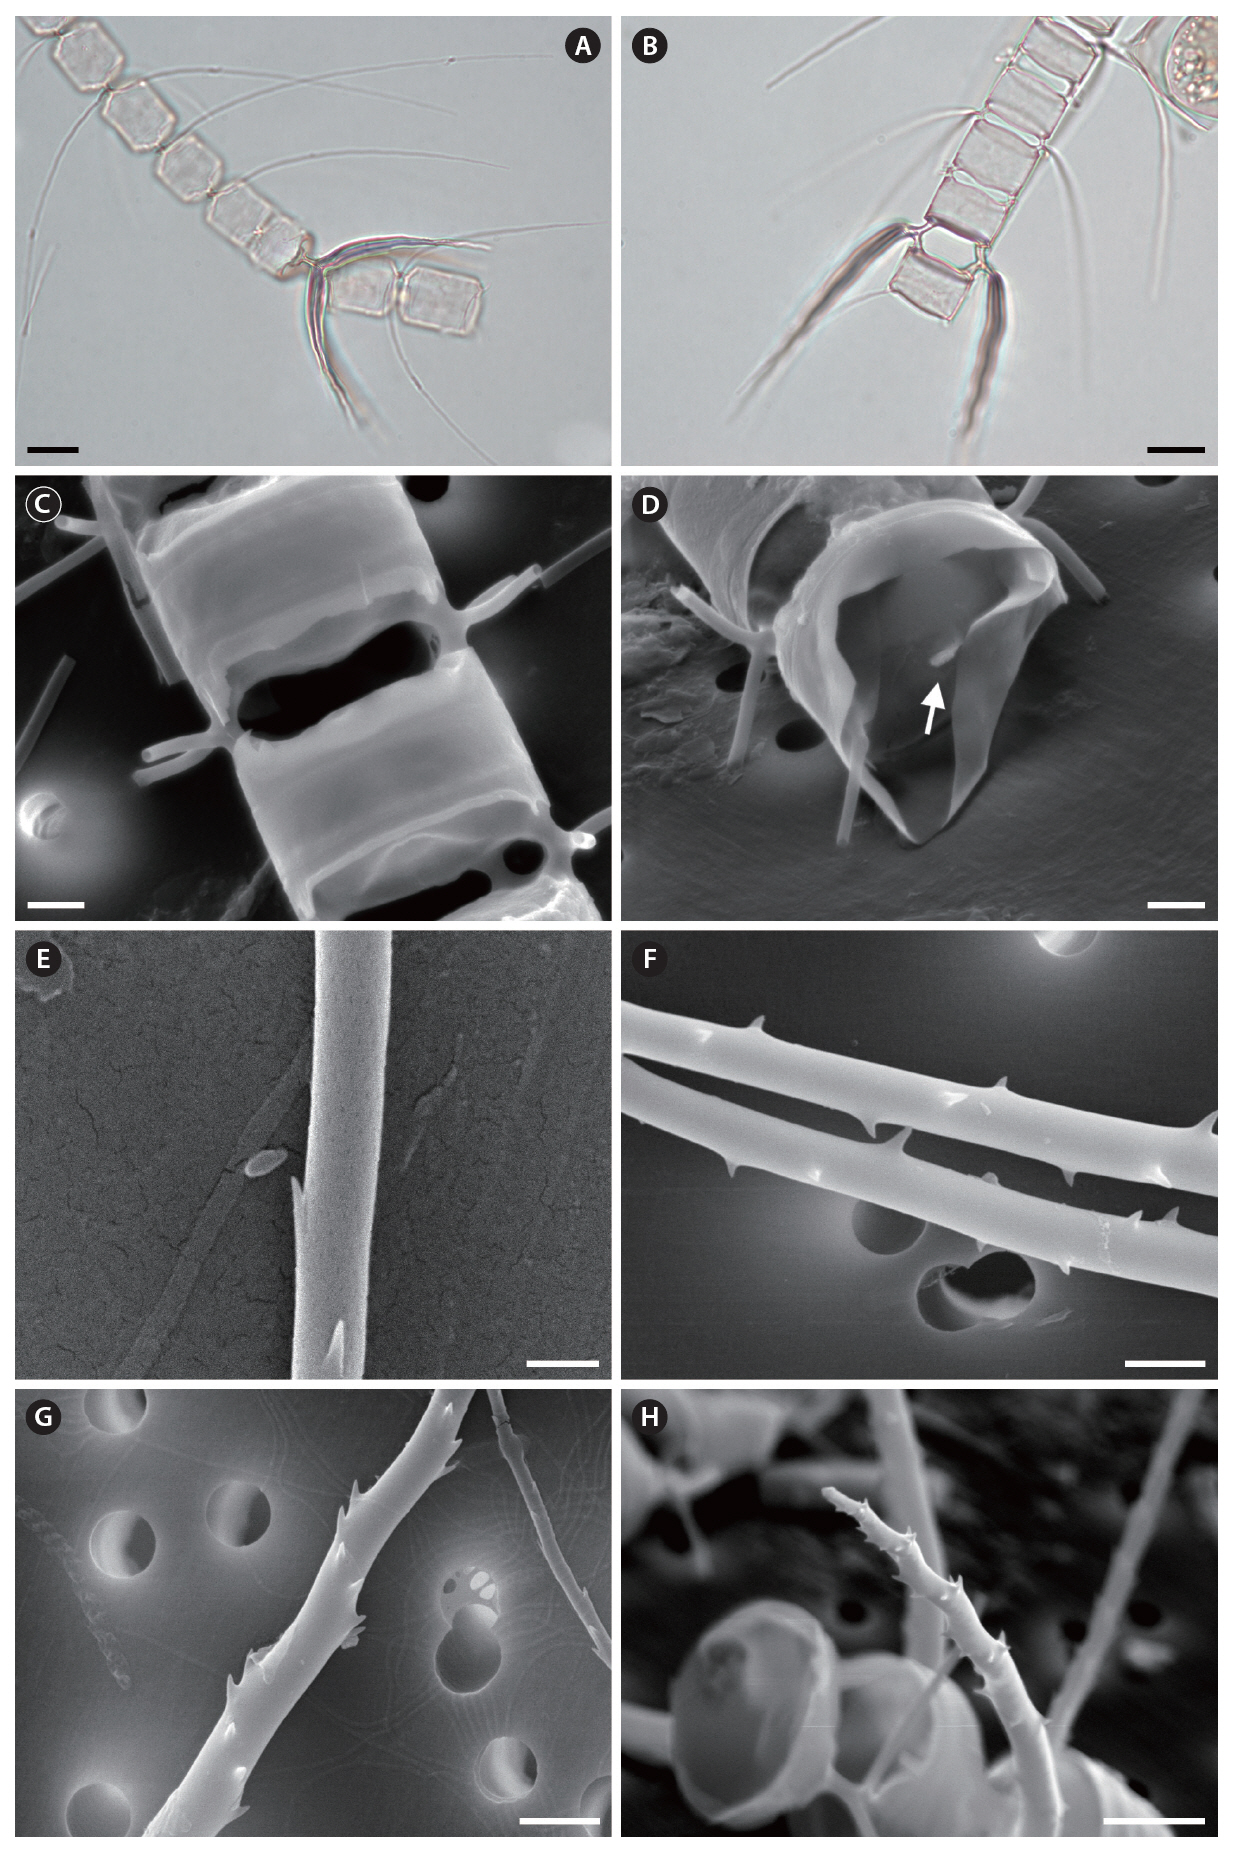 Chaetoceros contortus (A & B light microscope; C-H scanning electron microscope). (A) Part of a chain in narrow girdle view showing common and special intercalary setae. (B & C) Part of a chain in broad girdle view showing shapes of foramina. (D) Rimoportula located on the center of the terminal valve (arrow). (E) Common intercalary setae with spines. (F) Original region of special intercalary setae with irregular spines. (G) Special intercalary setae with heavily silicified spines in spirals. (H) Tip of tapering special intercalary seta with spines in spirals. Scale bars represent: A & B 10 ㎛; C D F & G 2 ㎛; E 0.5 ㎛; H 5 ㎛.